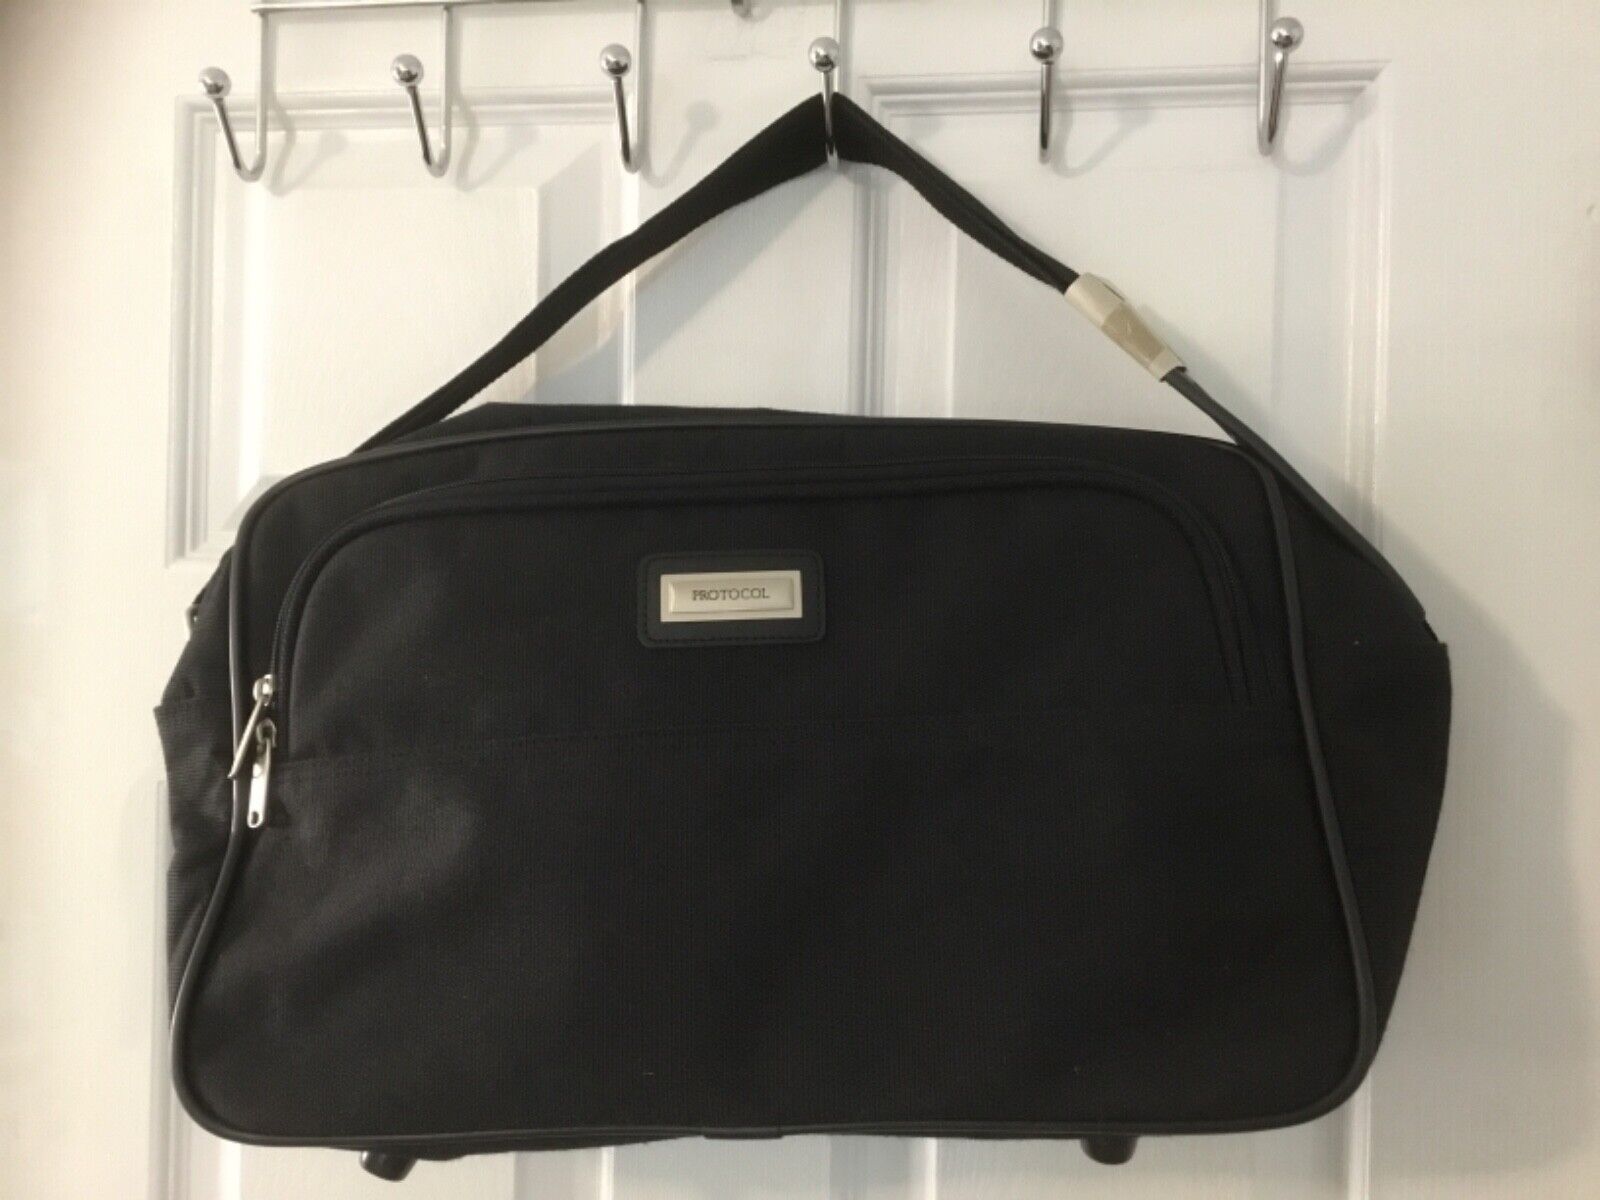 New W/O Tags Protocol Black Computer Bag W/Two Zip Compartments & Shoulder Strap